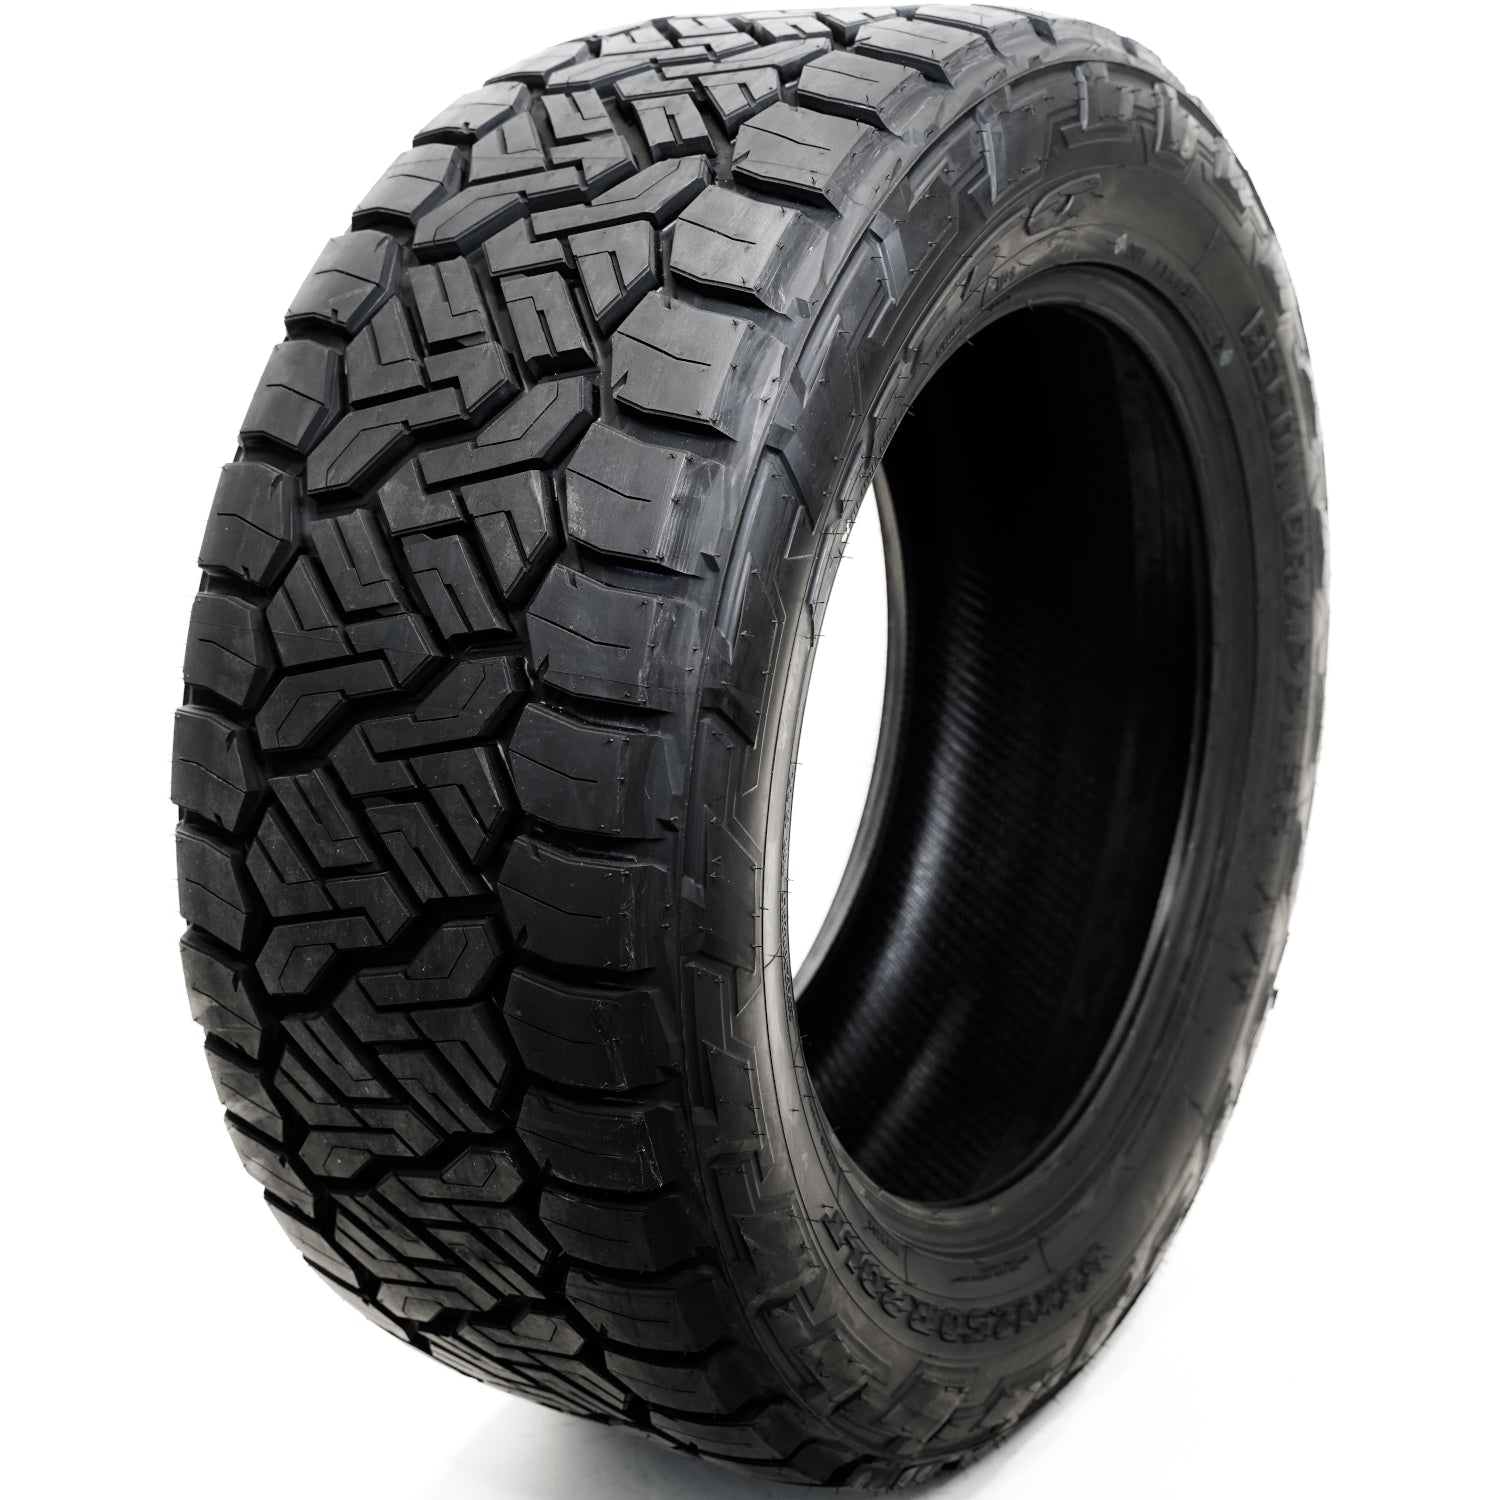 NITTO RECON GRAPPLER A/T LT275/70R18 (33.2X10.8R 18) Tires